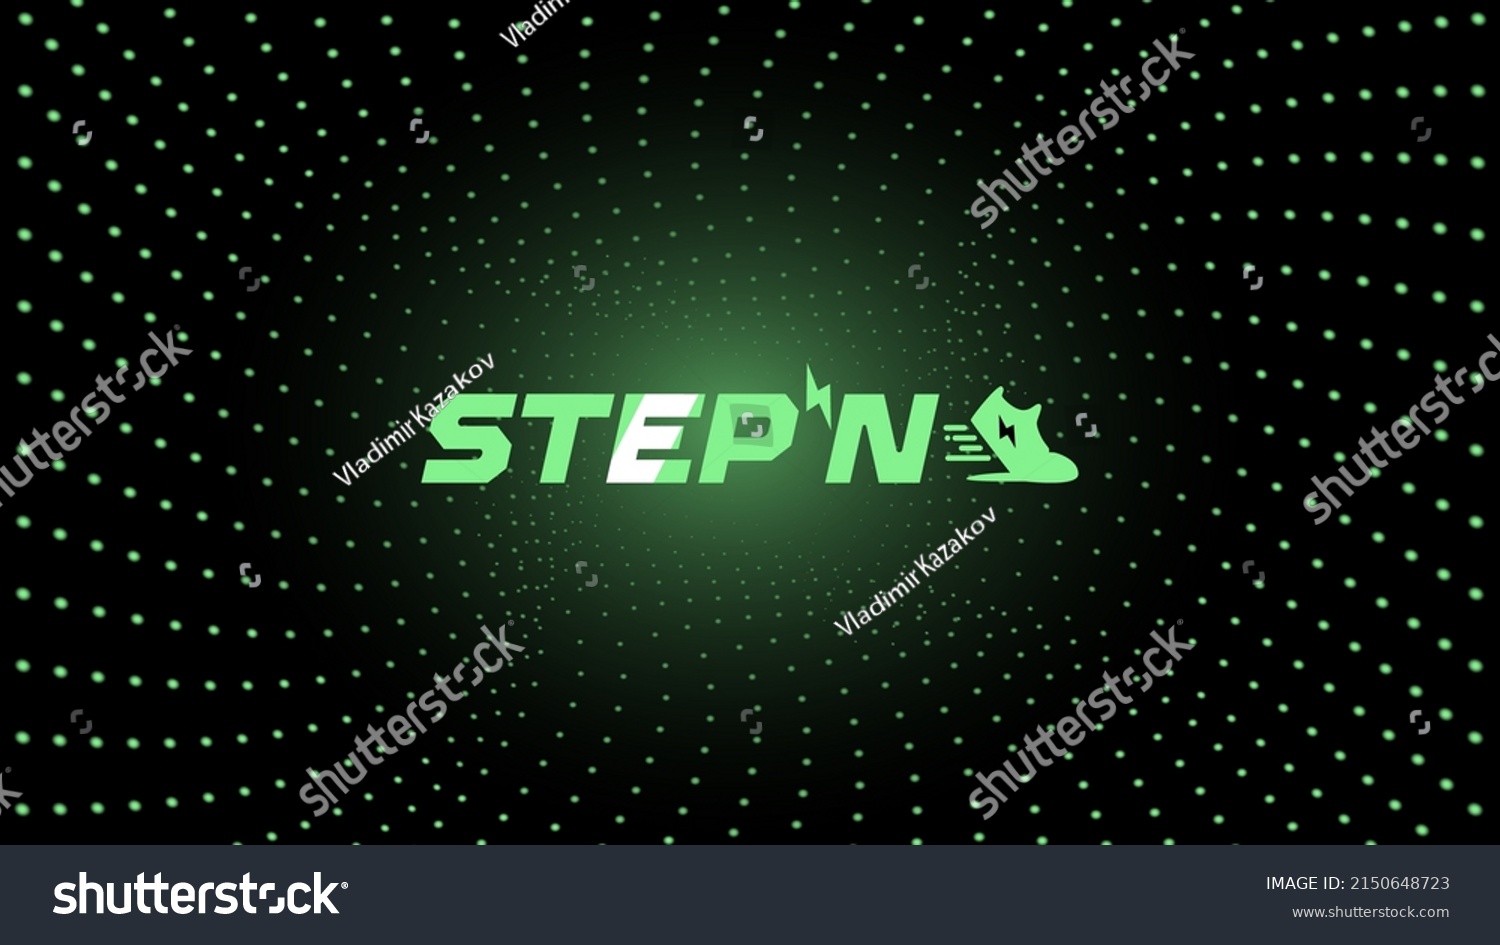 SVG of STEPN company logo icon in the center of spiral of glowing green dots on dark background. Web3 running app with fun game and social elements with Move to Earn concept. Vector illustration. svg